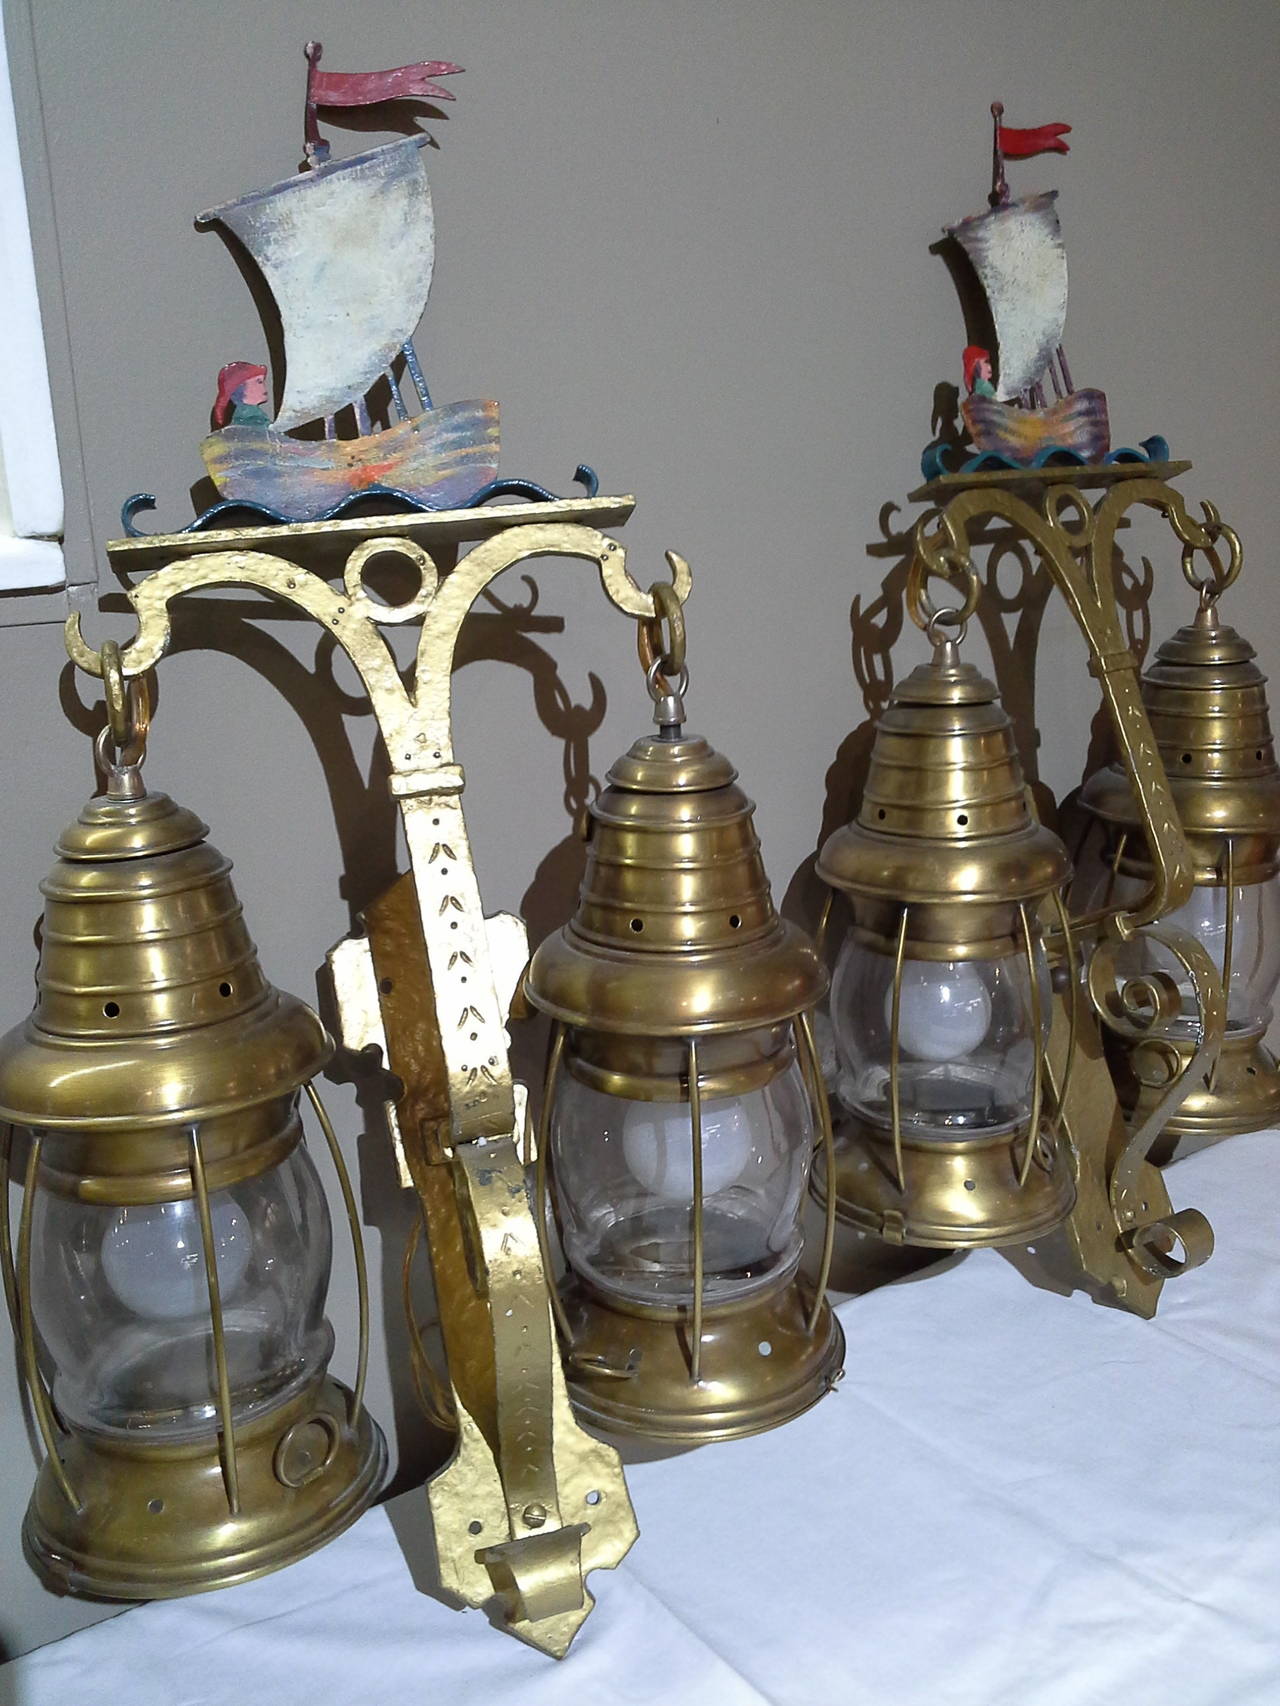 Nautical Lantern Cast Iron Wall Sconces With Sailboat/Fisherman Painted Tops,
Two lanterns on each sconce, glass bottoms for light and to replace bulbs, Cast Iron frames and rewired, the boat and fisherman are painted on both sides. The sconces